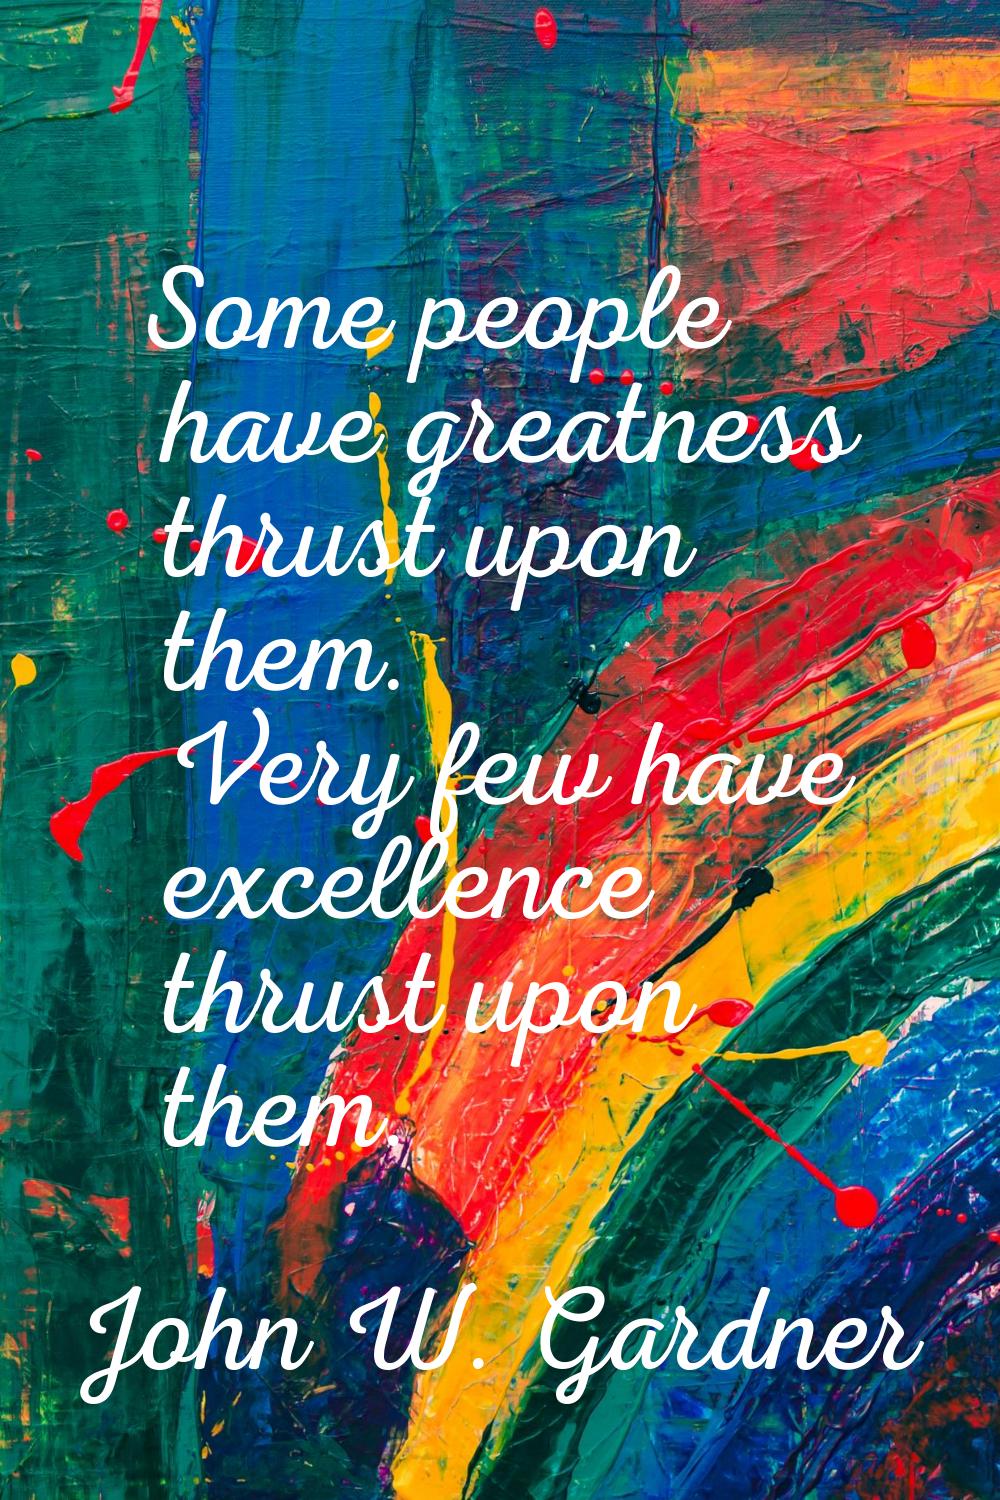 Some people have greatness thrust upon them. Very few have excellence thrust upon them.